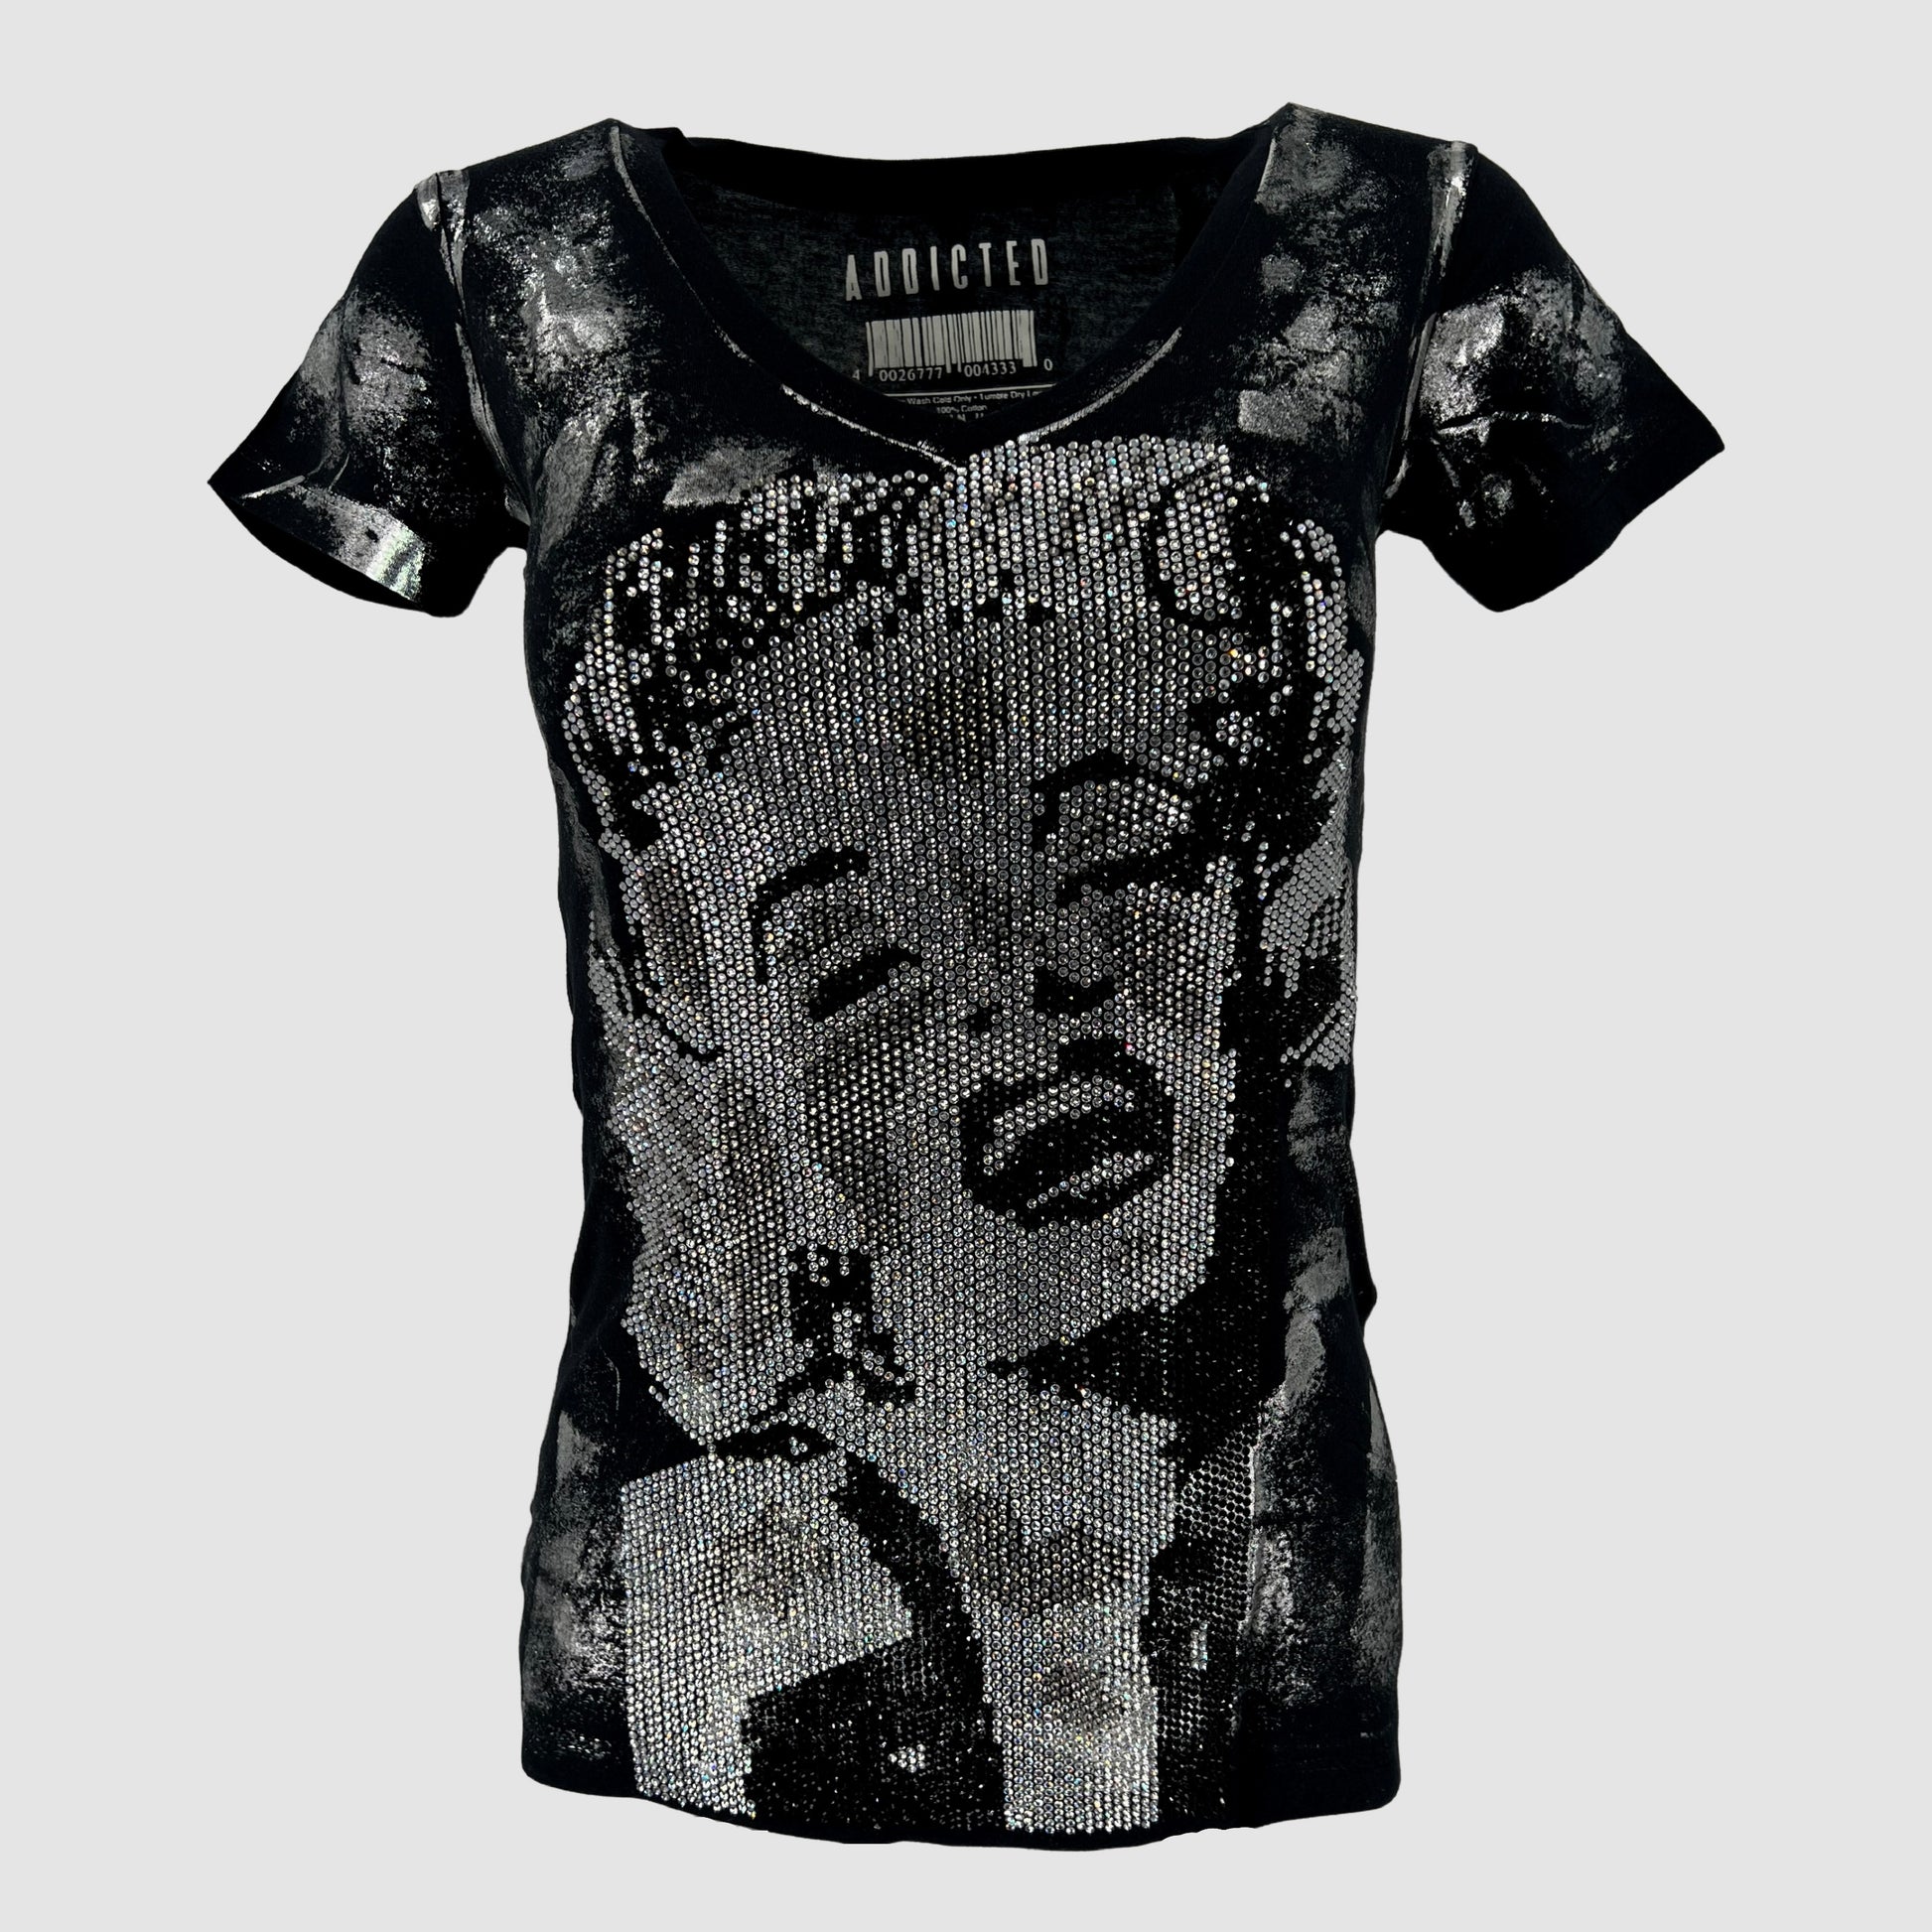 addicted marilyn t-shirt for women